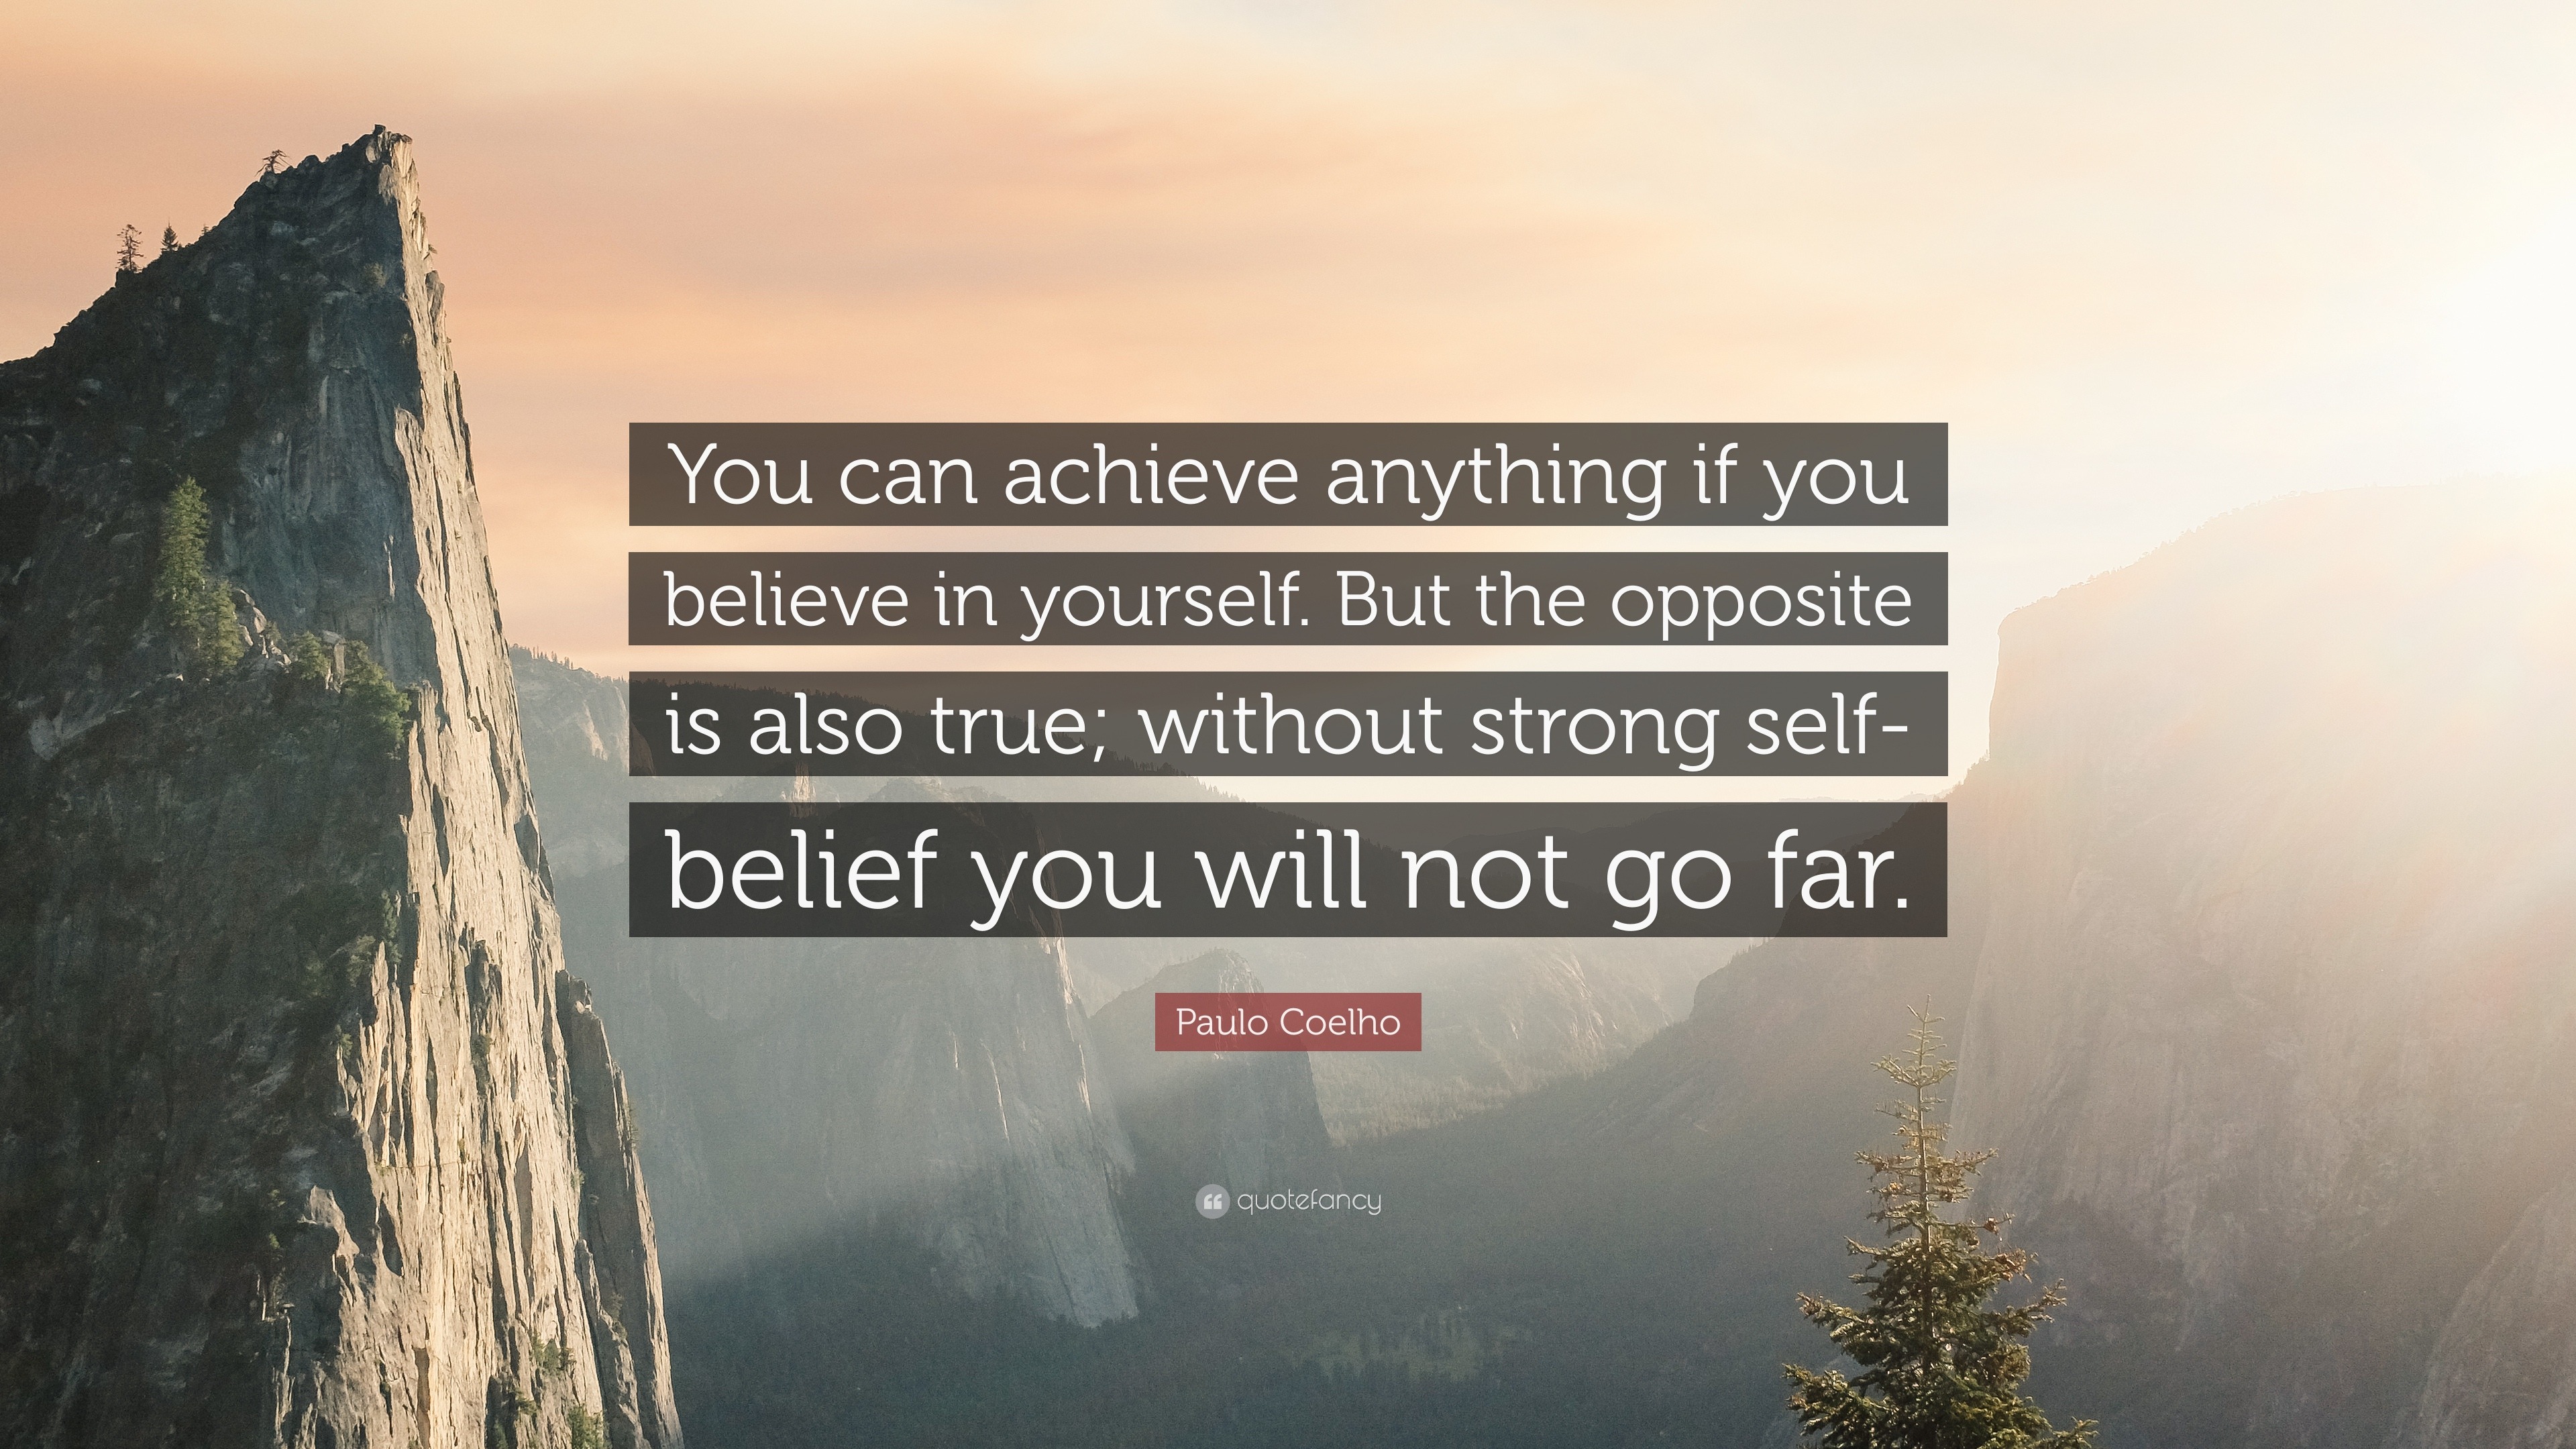 Paulo Coelho Quote: “You can achieve anything if you believe in